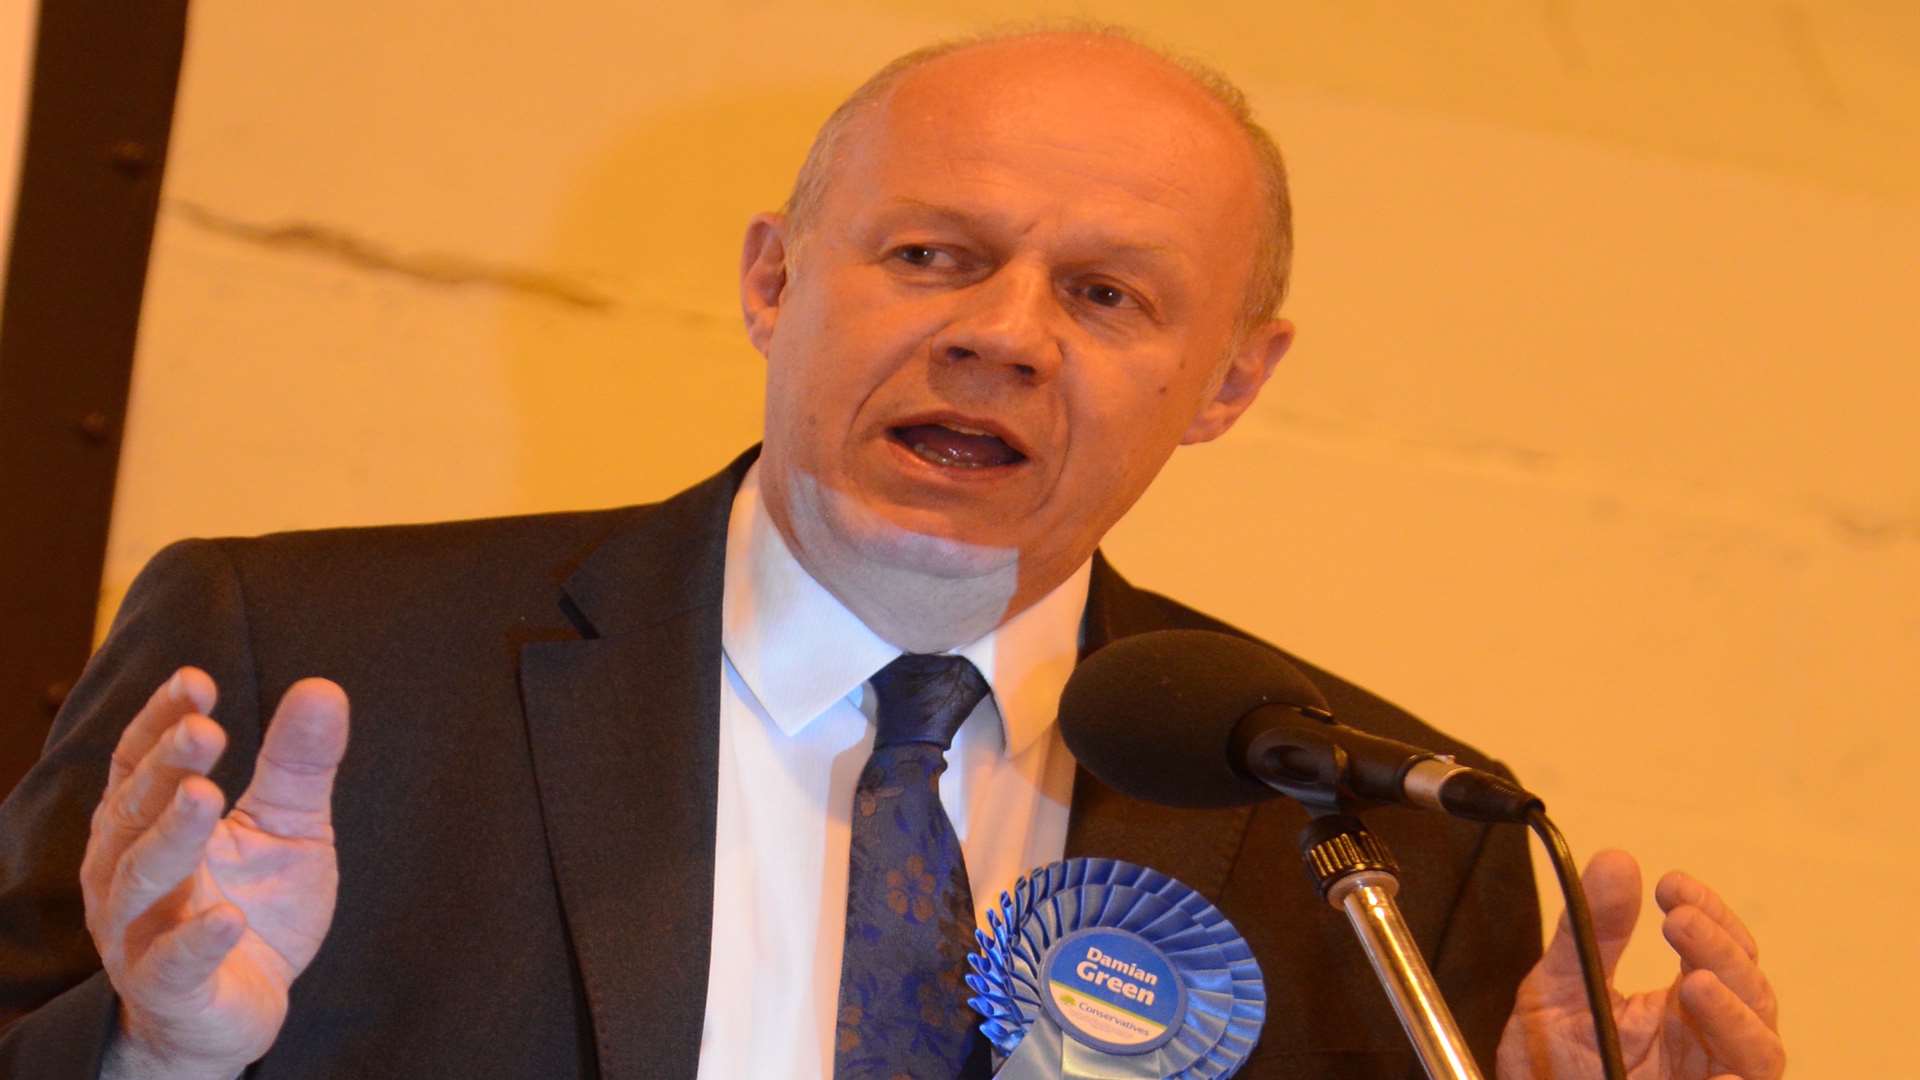 Damian Green re-elected as Conservative MP for Ashford